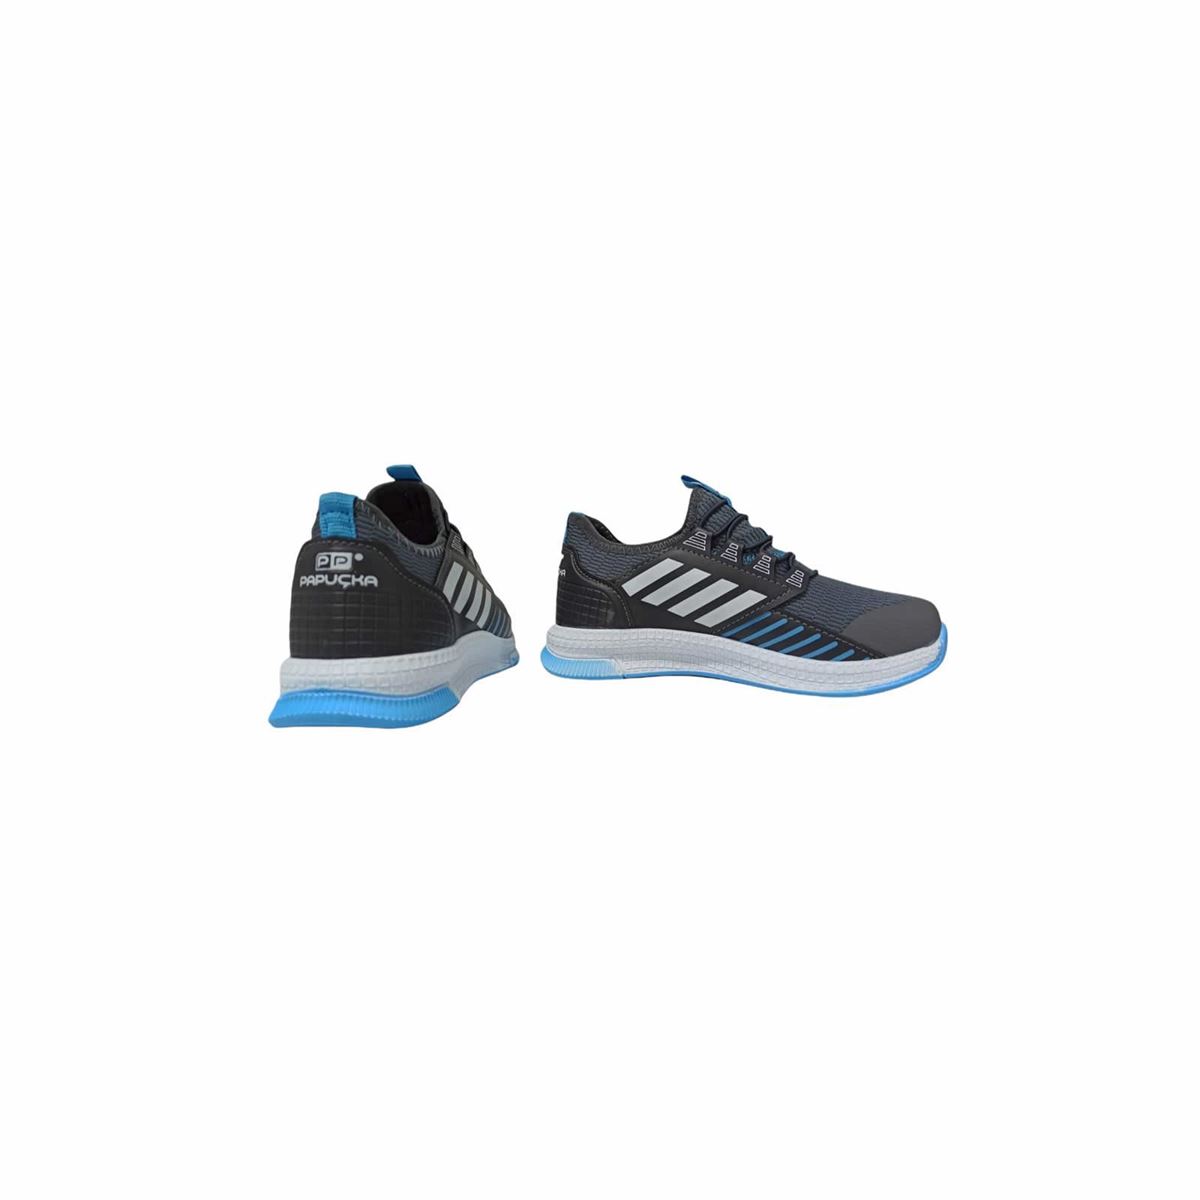 Picture of 1950 Papuçka Sports Knitwear Kids Shoes